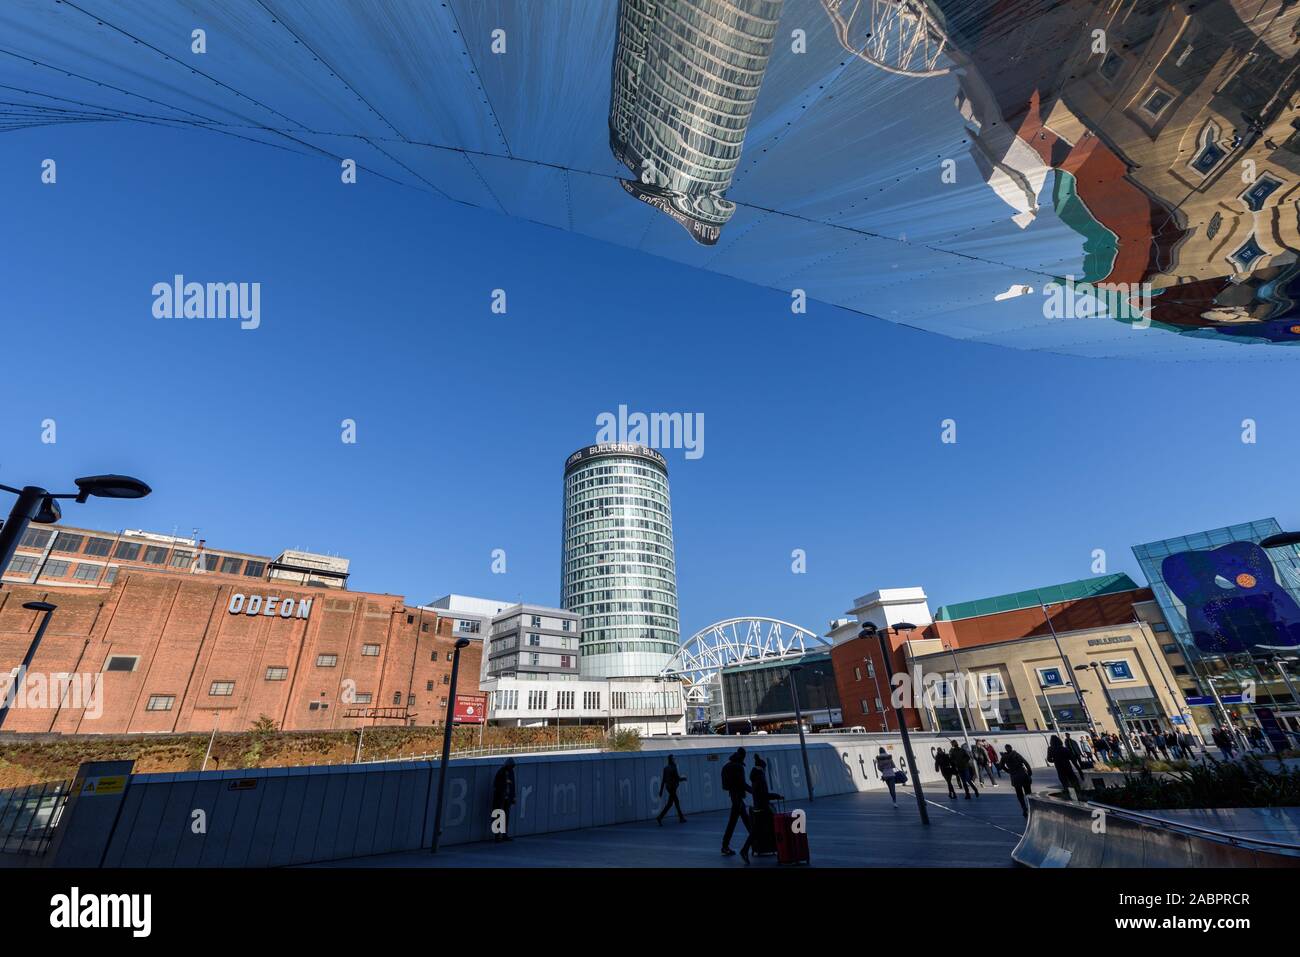 NEW STREET STATION, BIRMINGHAM, ENGLAND-FEB 25,2018: view of the Rotunda from walking up from Moor St to the Bullring, Birmingham, England. Stock Photo